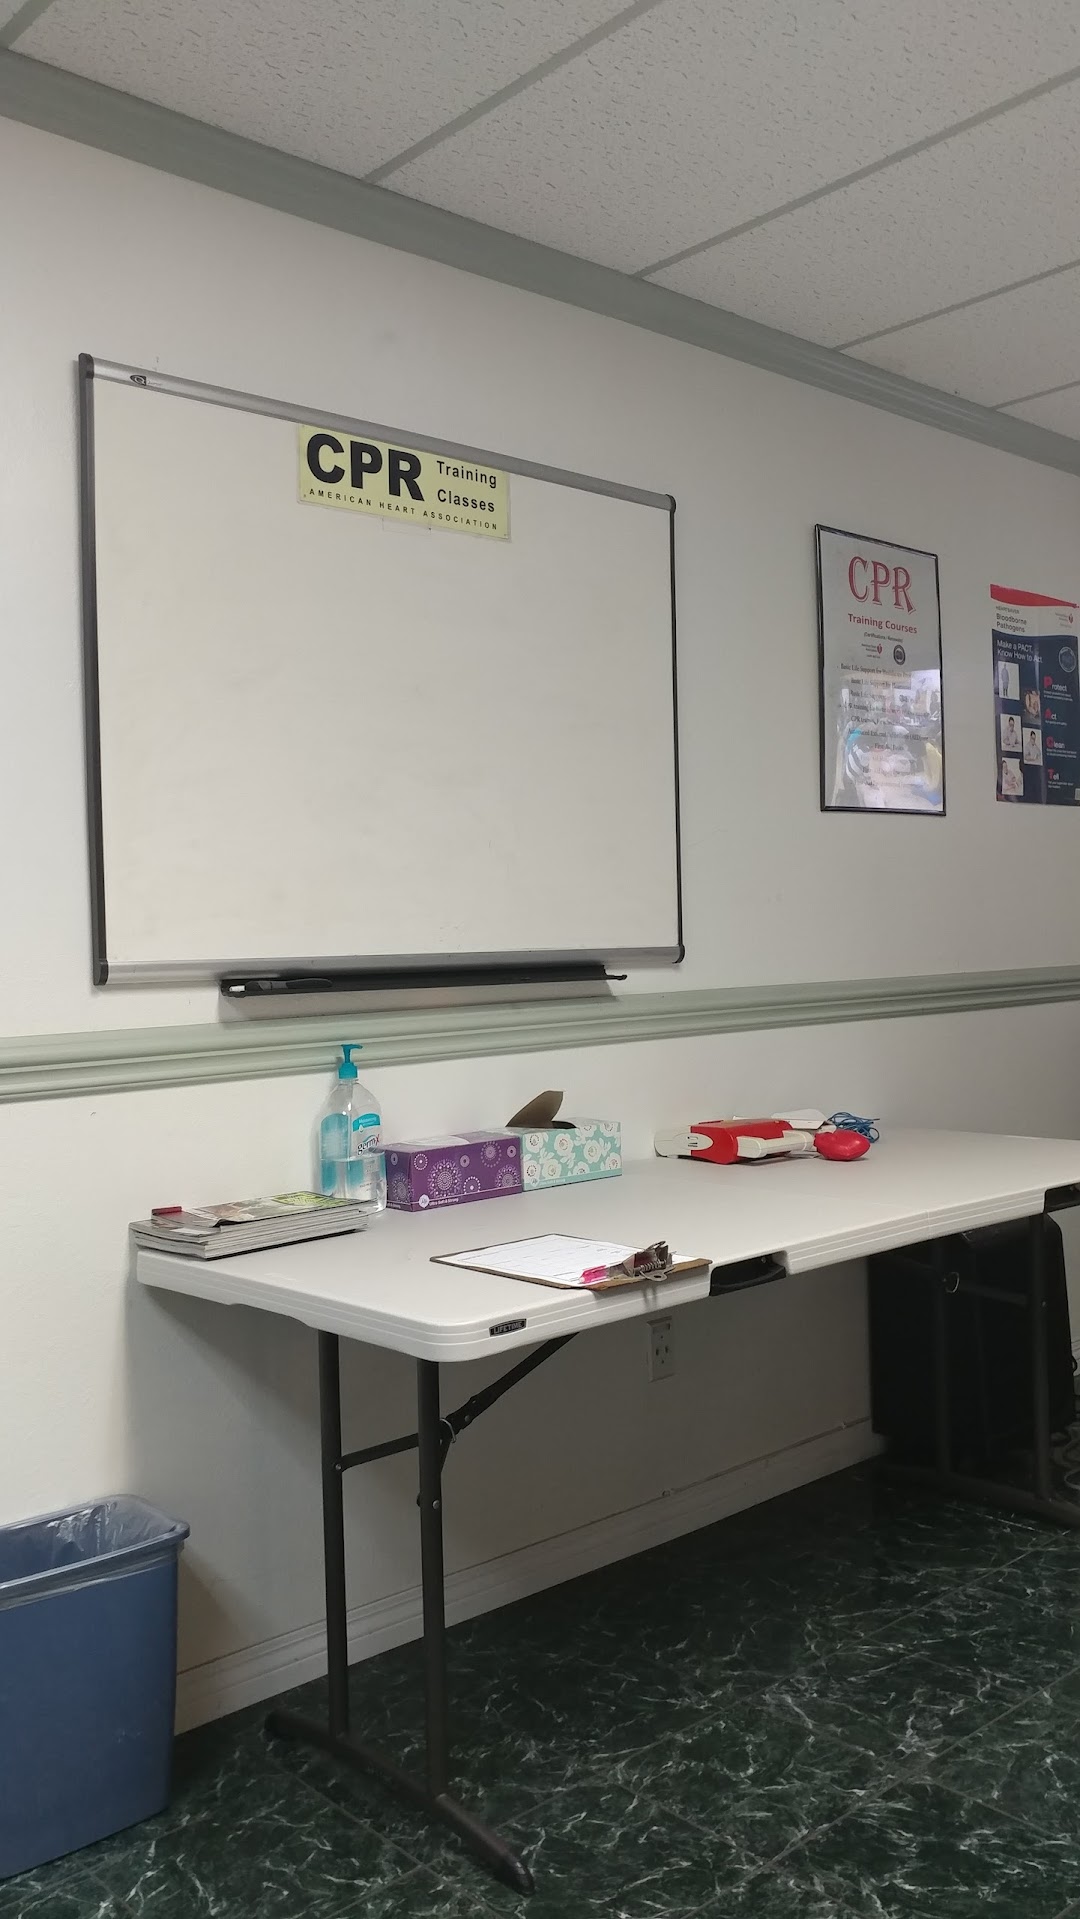 CPR - First Response Education